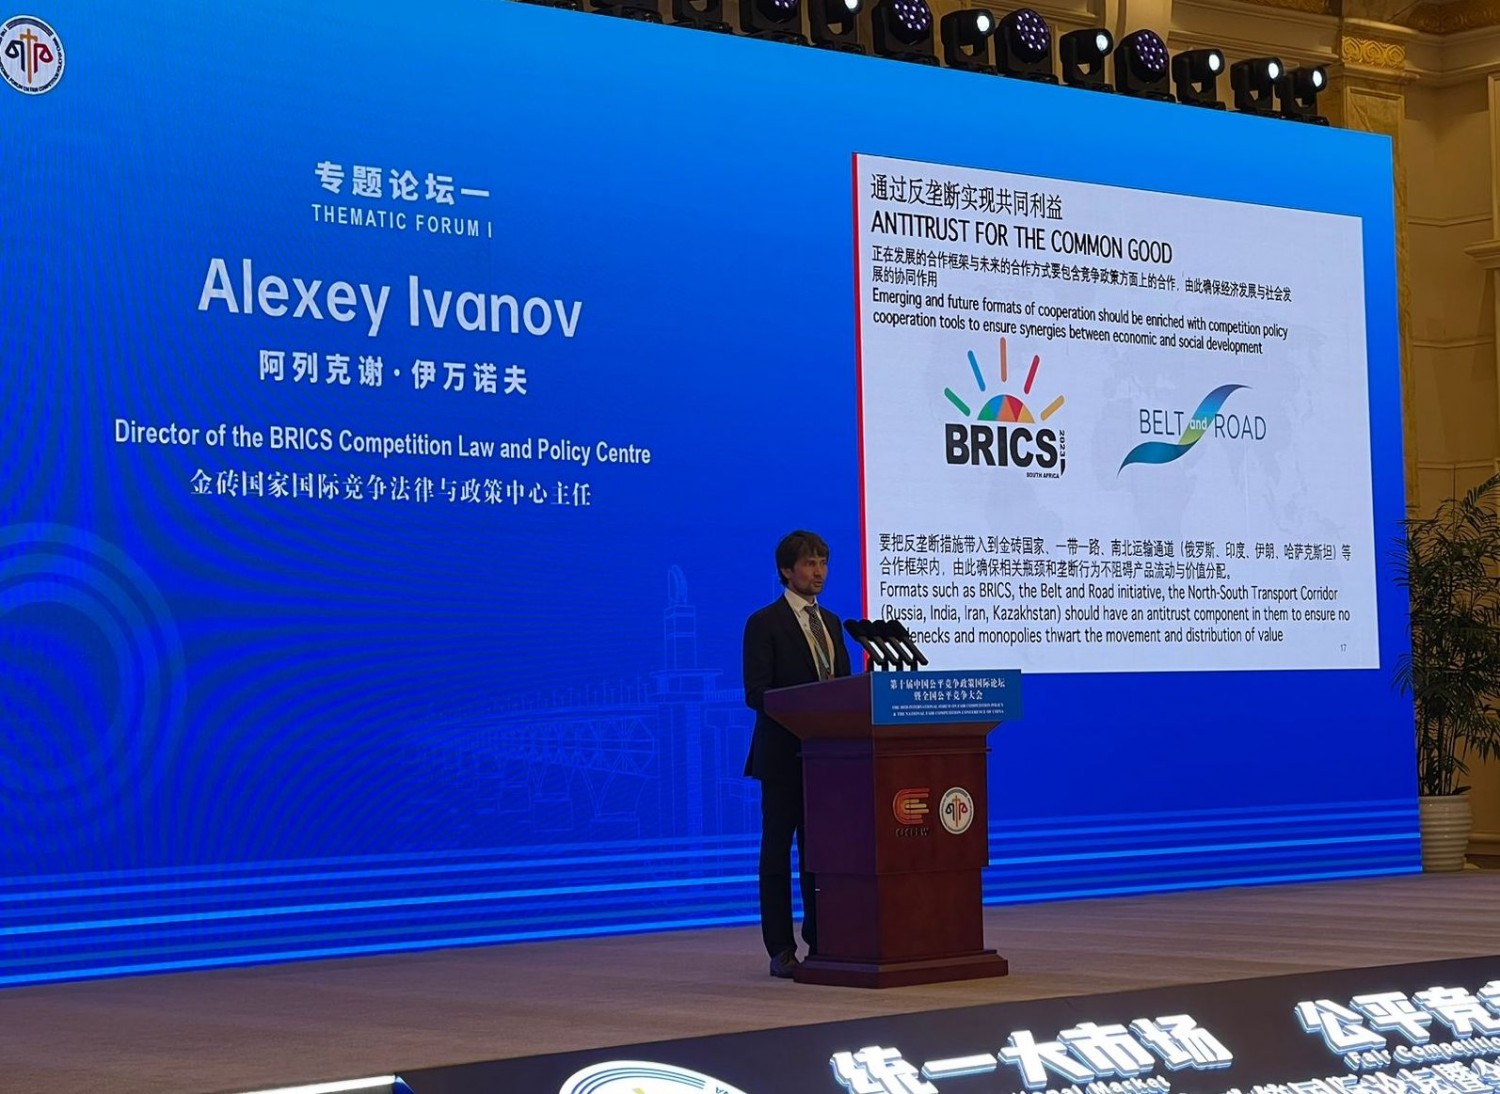 Director of the BRICS Centre Spoke at the 10th China Fair Competition Policy International Forum